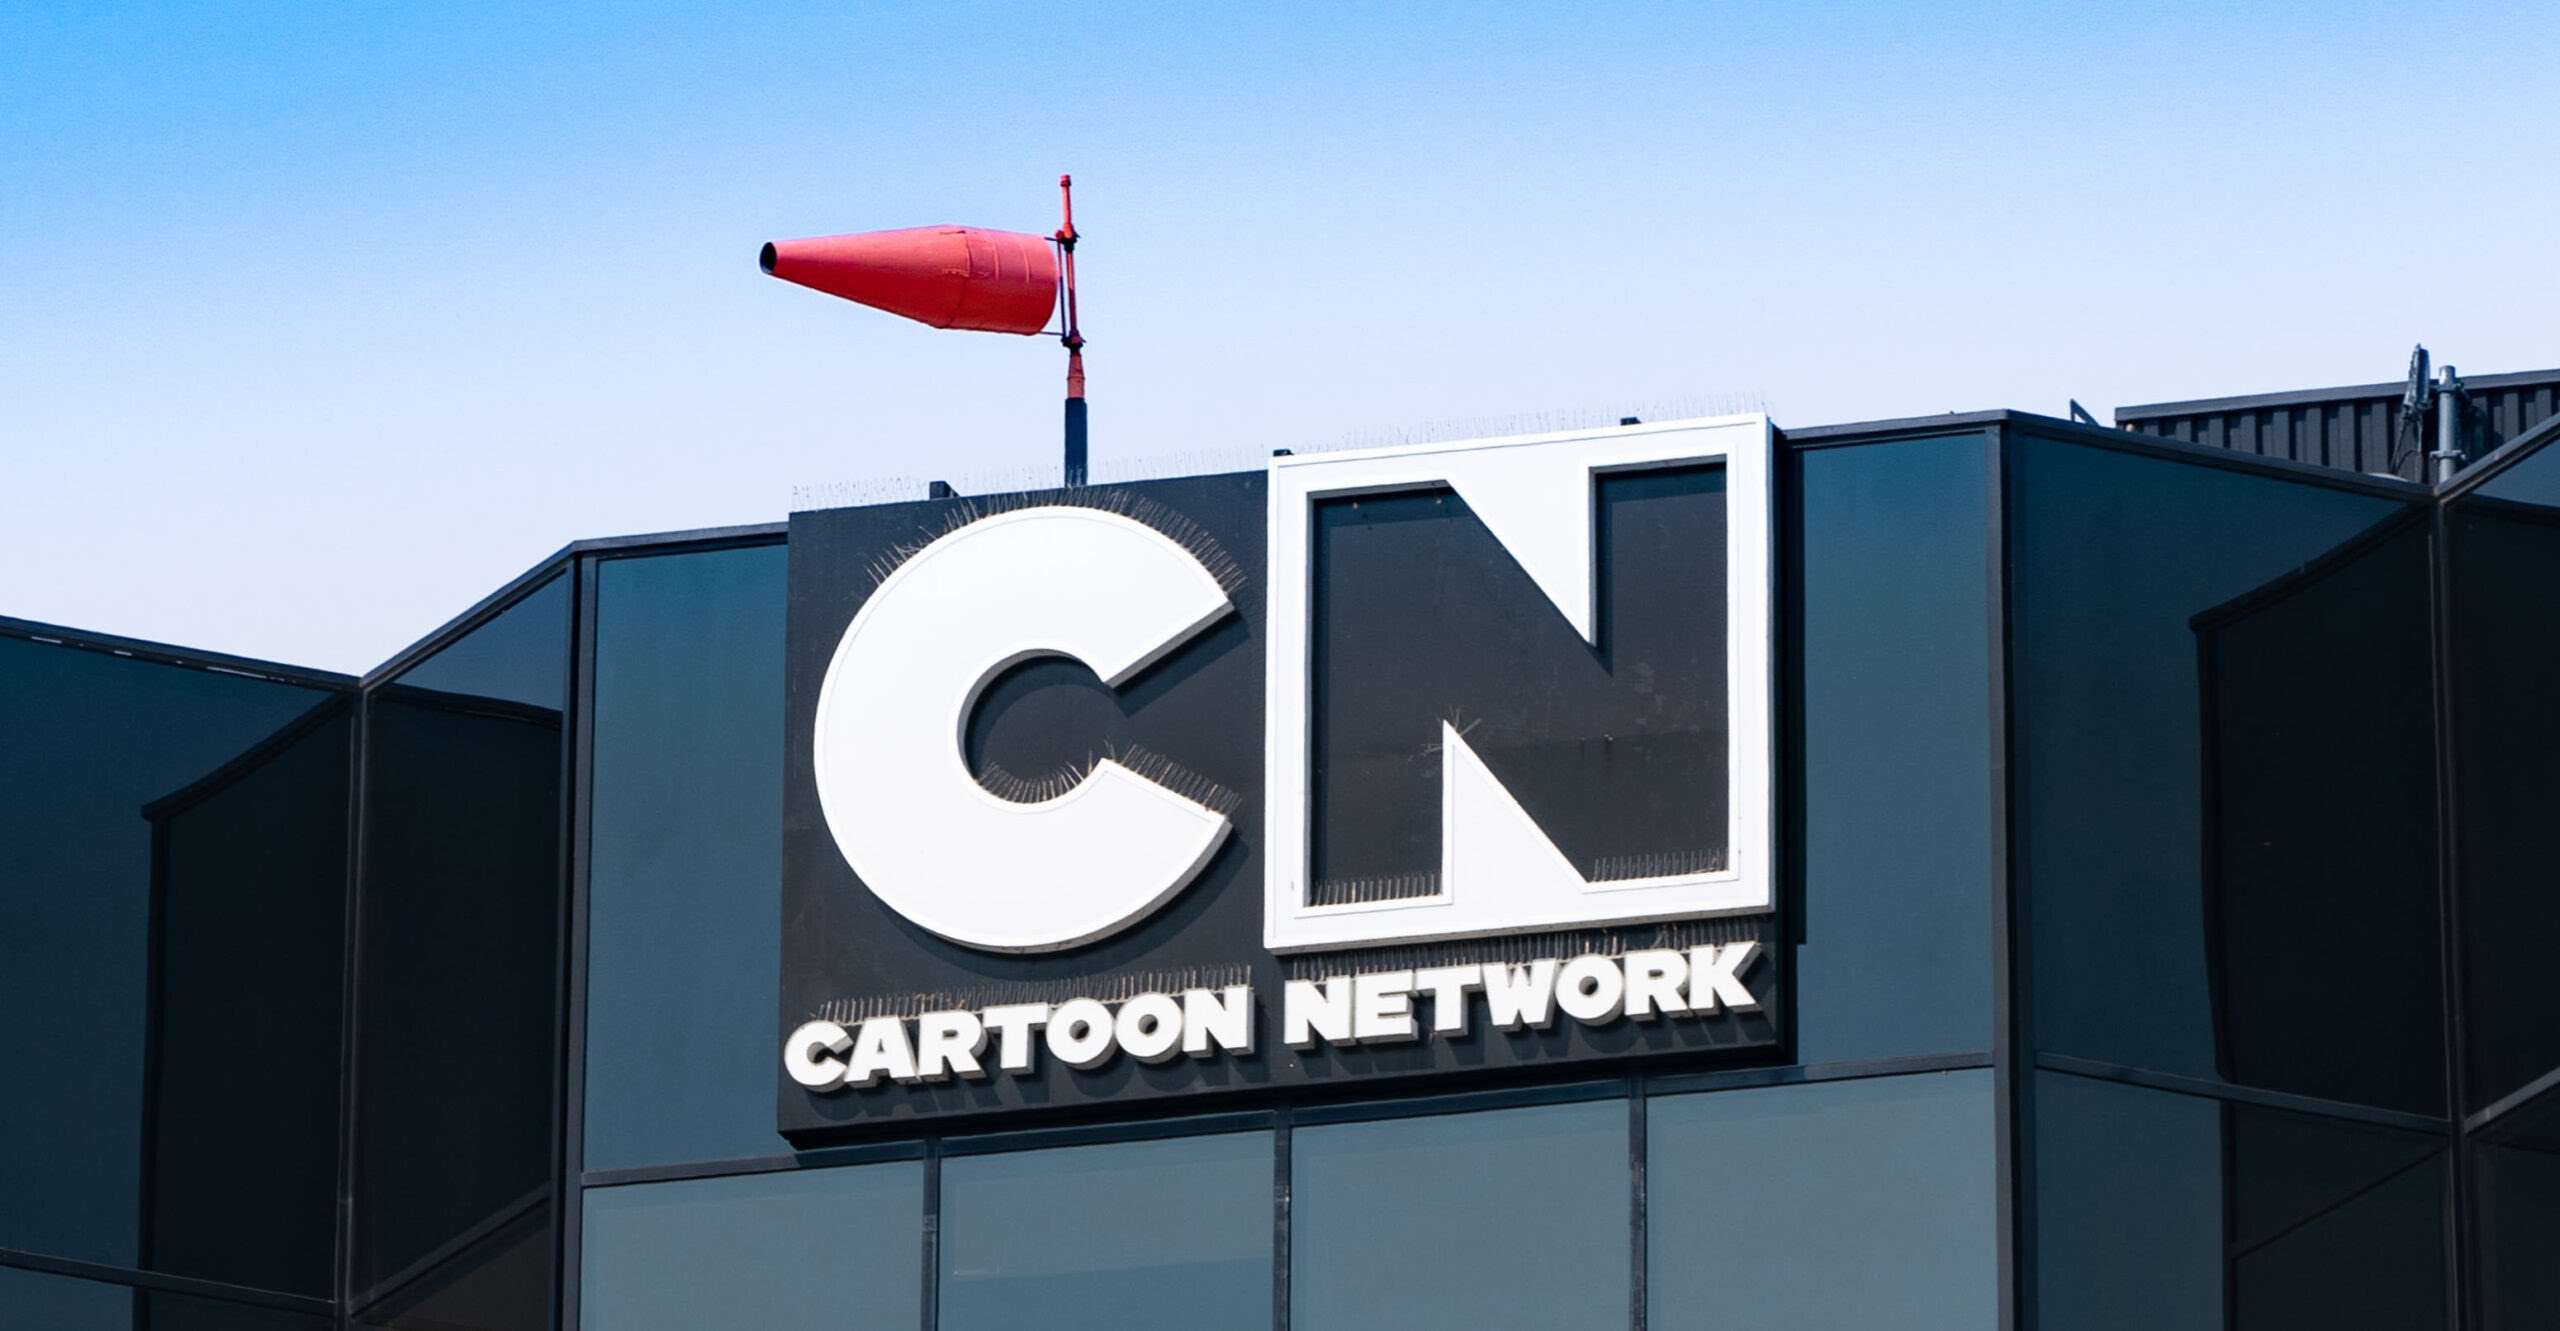 Cartoon Network’s ‘Anti-Racist’ PSA Tells Americans to ‘See Color’